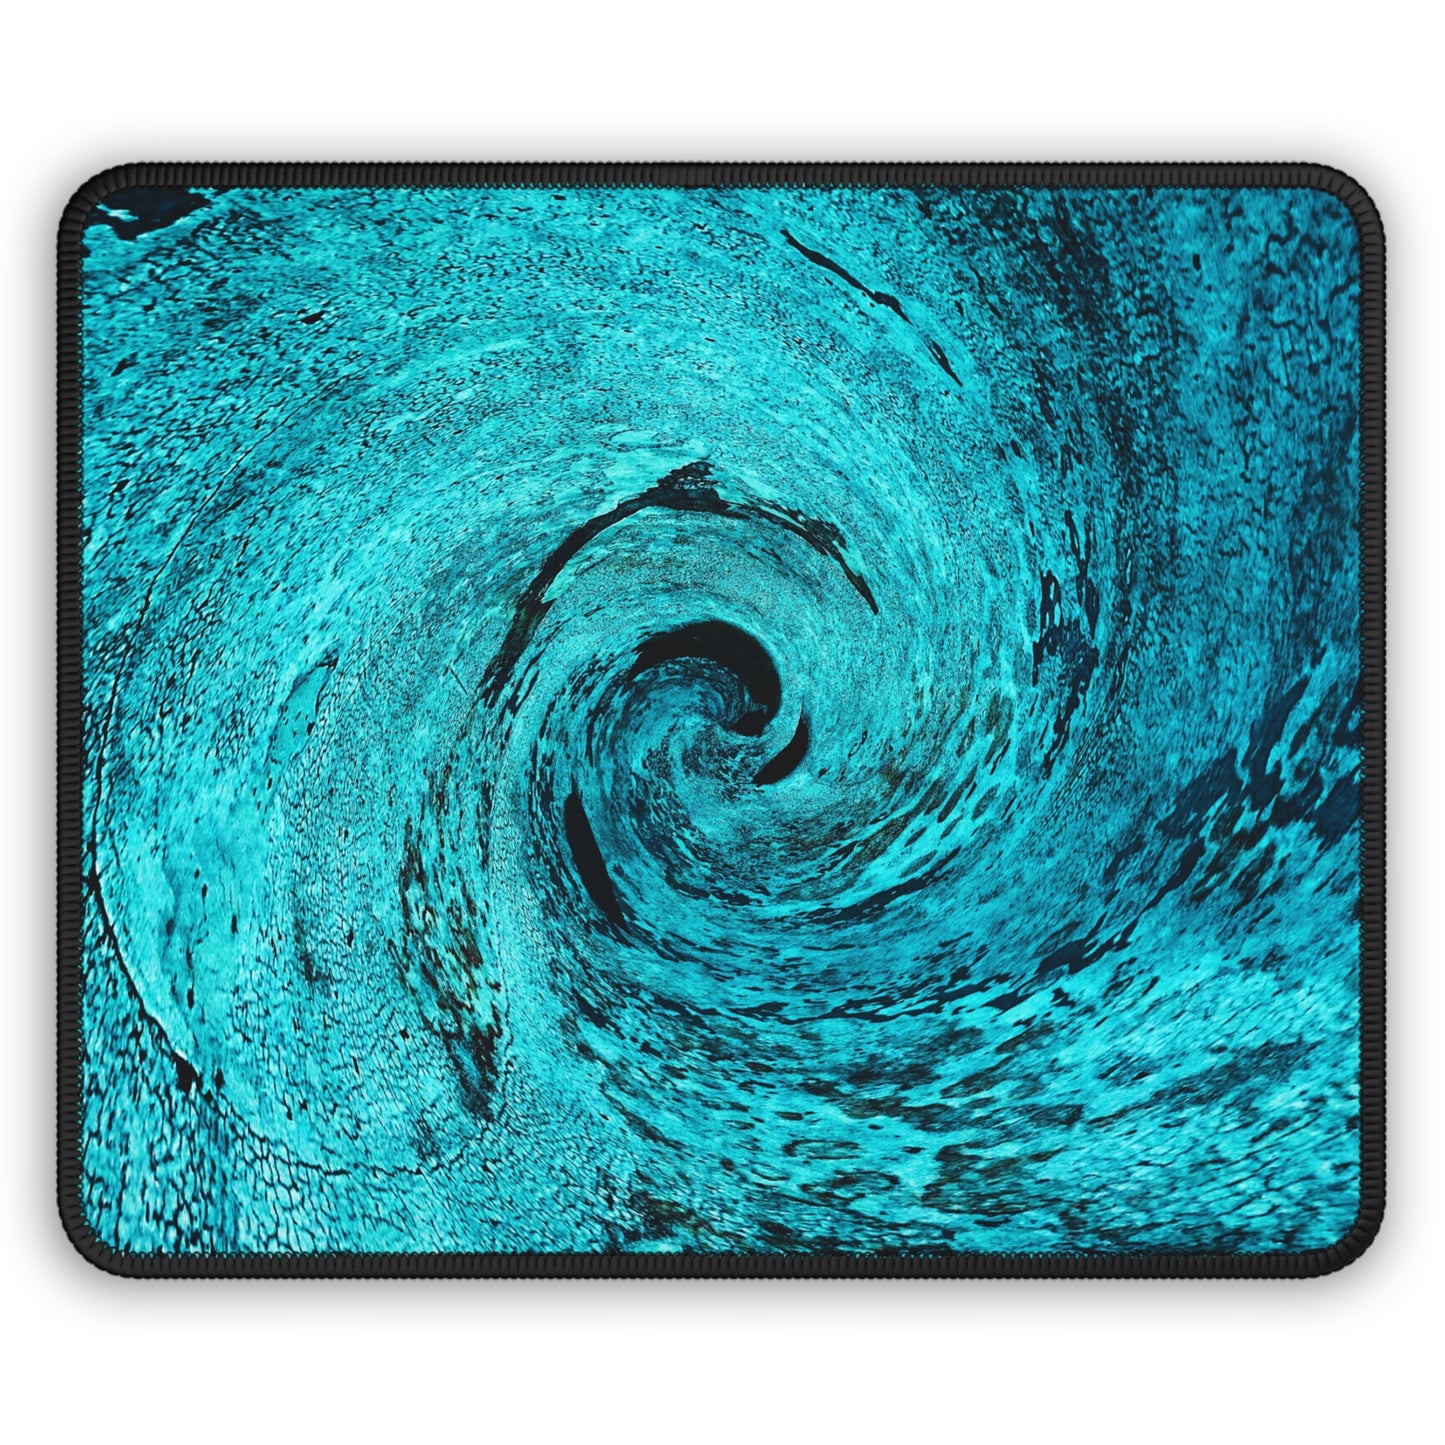 The Artistic Haven- The Alien Gaming Mouse Pad